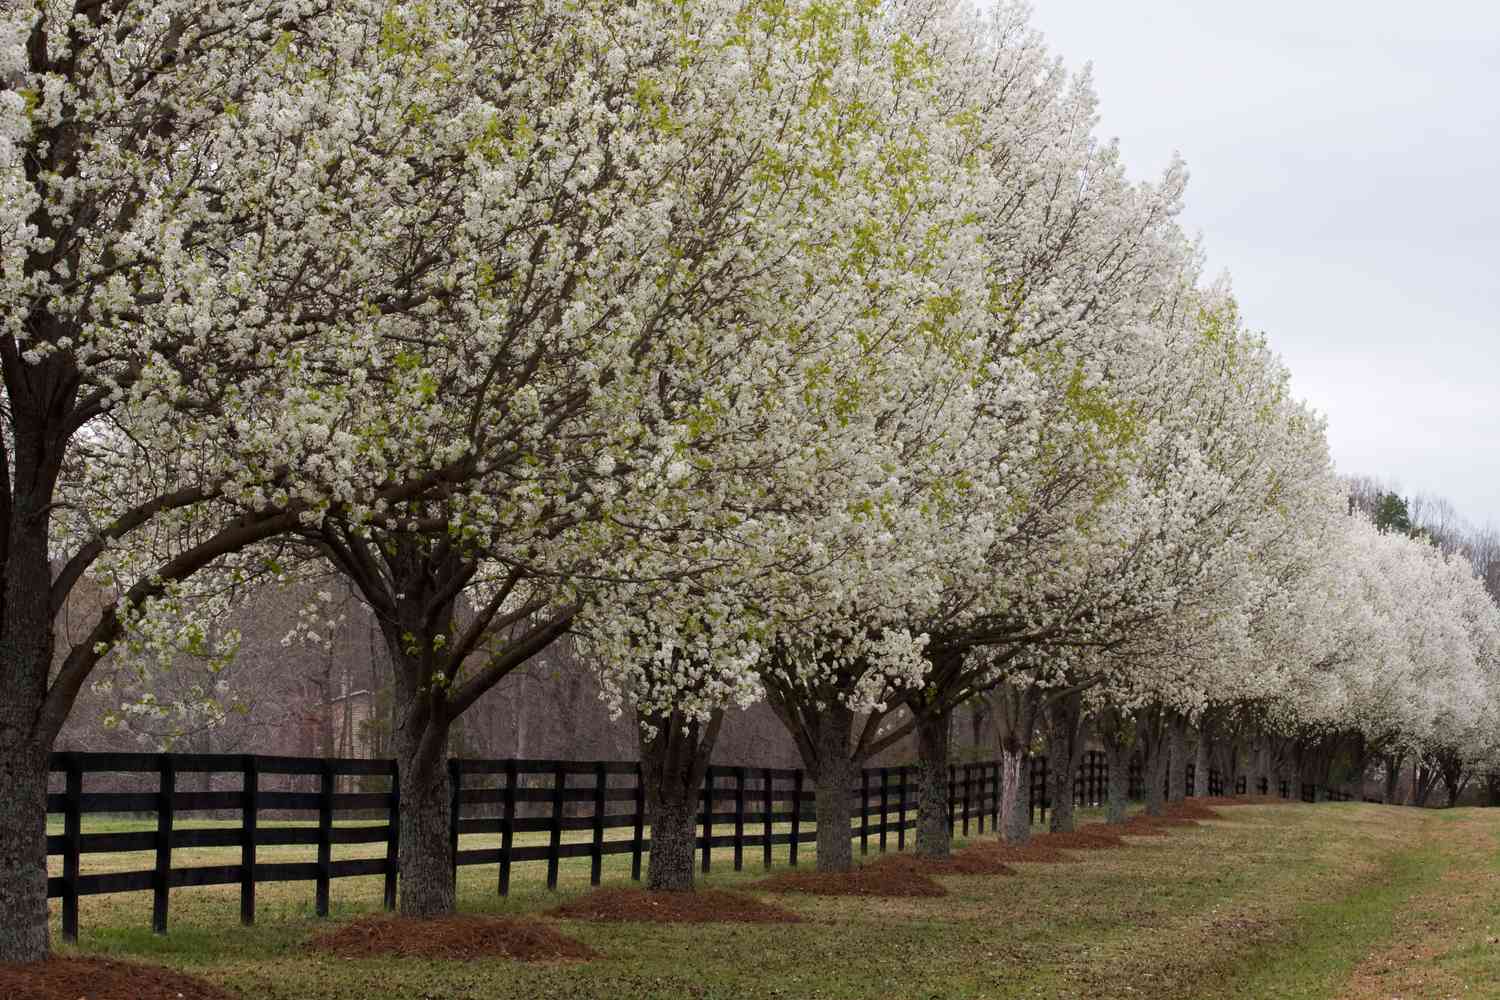 Ohio Bans the Sale of Once-Beloved Pear Trees